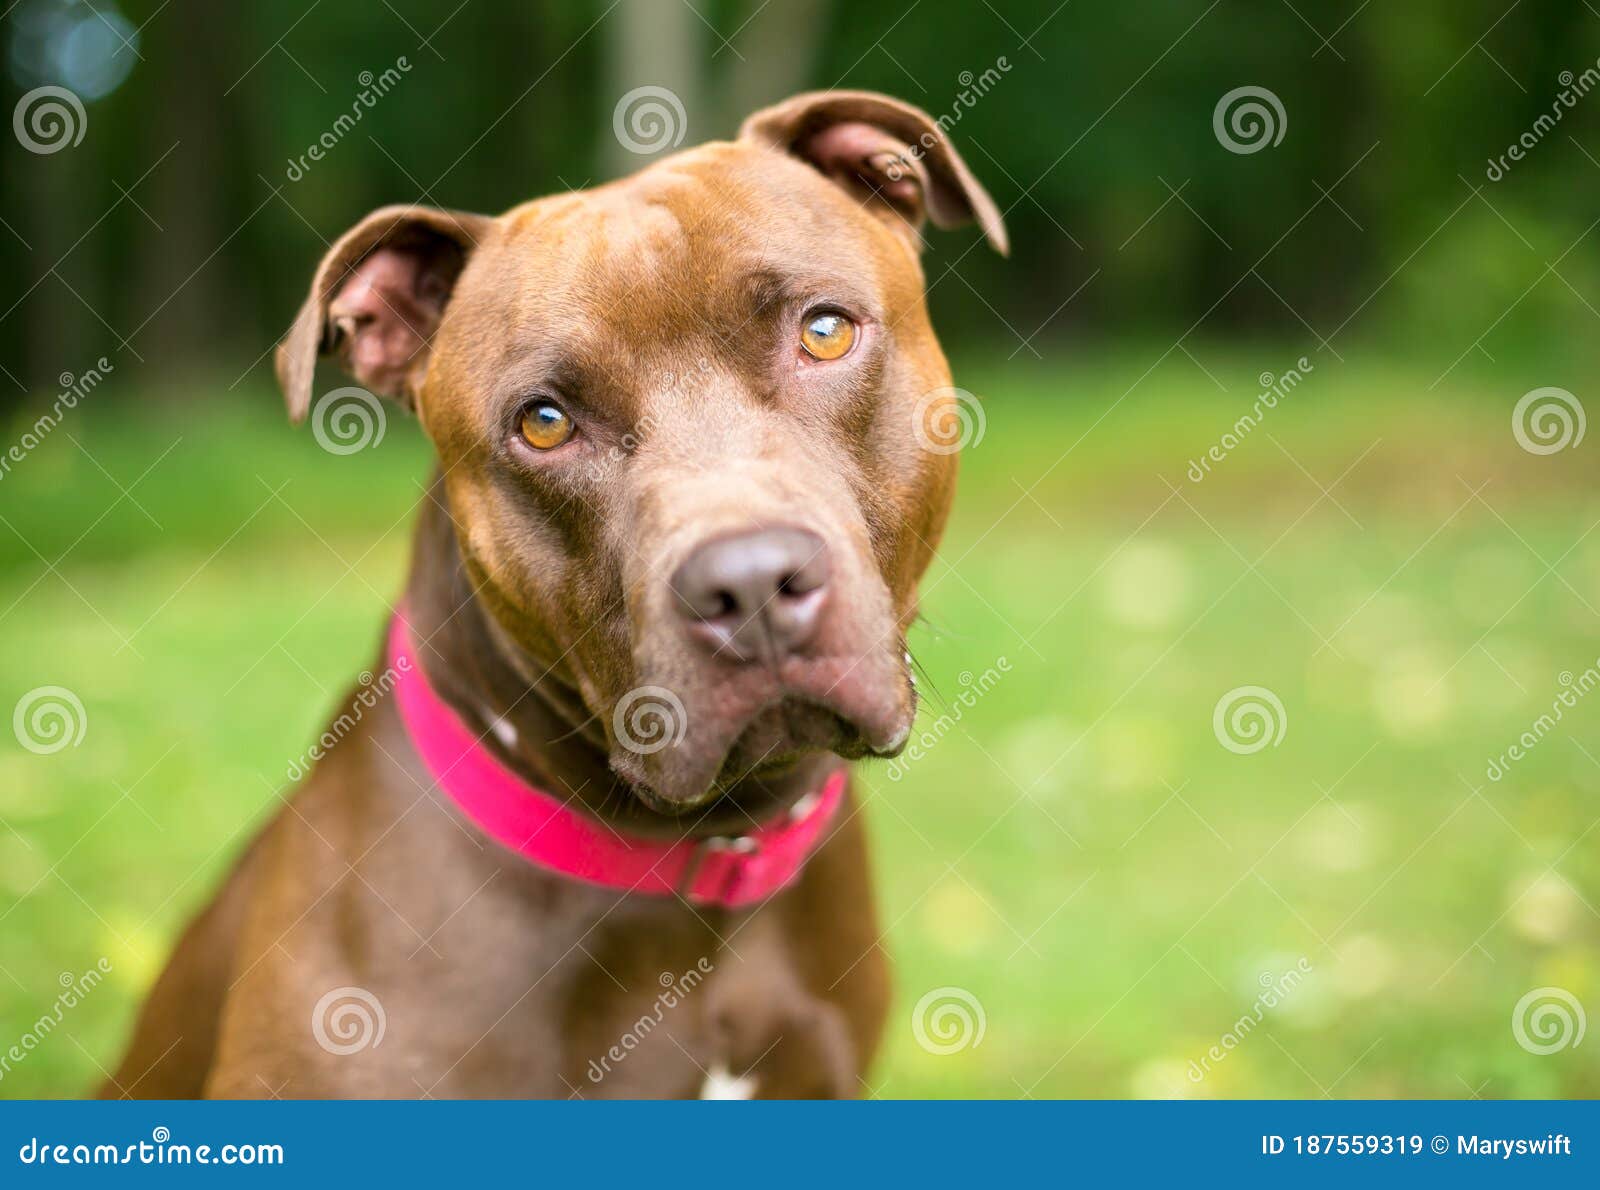 A Pit Bull Terrier X Labrador Retriever Mixed Breed Dog Looking Stock Image Image Of Expression Canine 187559319